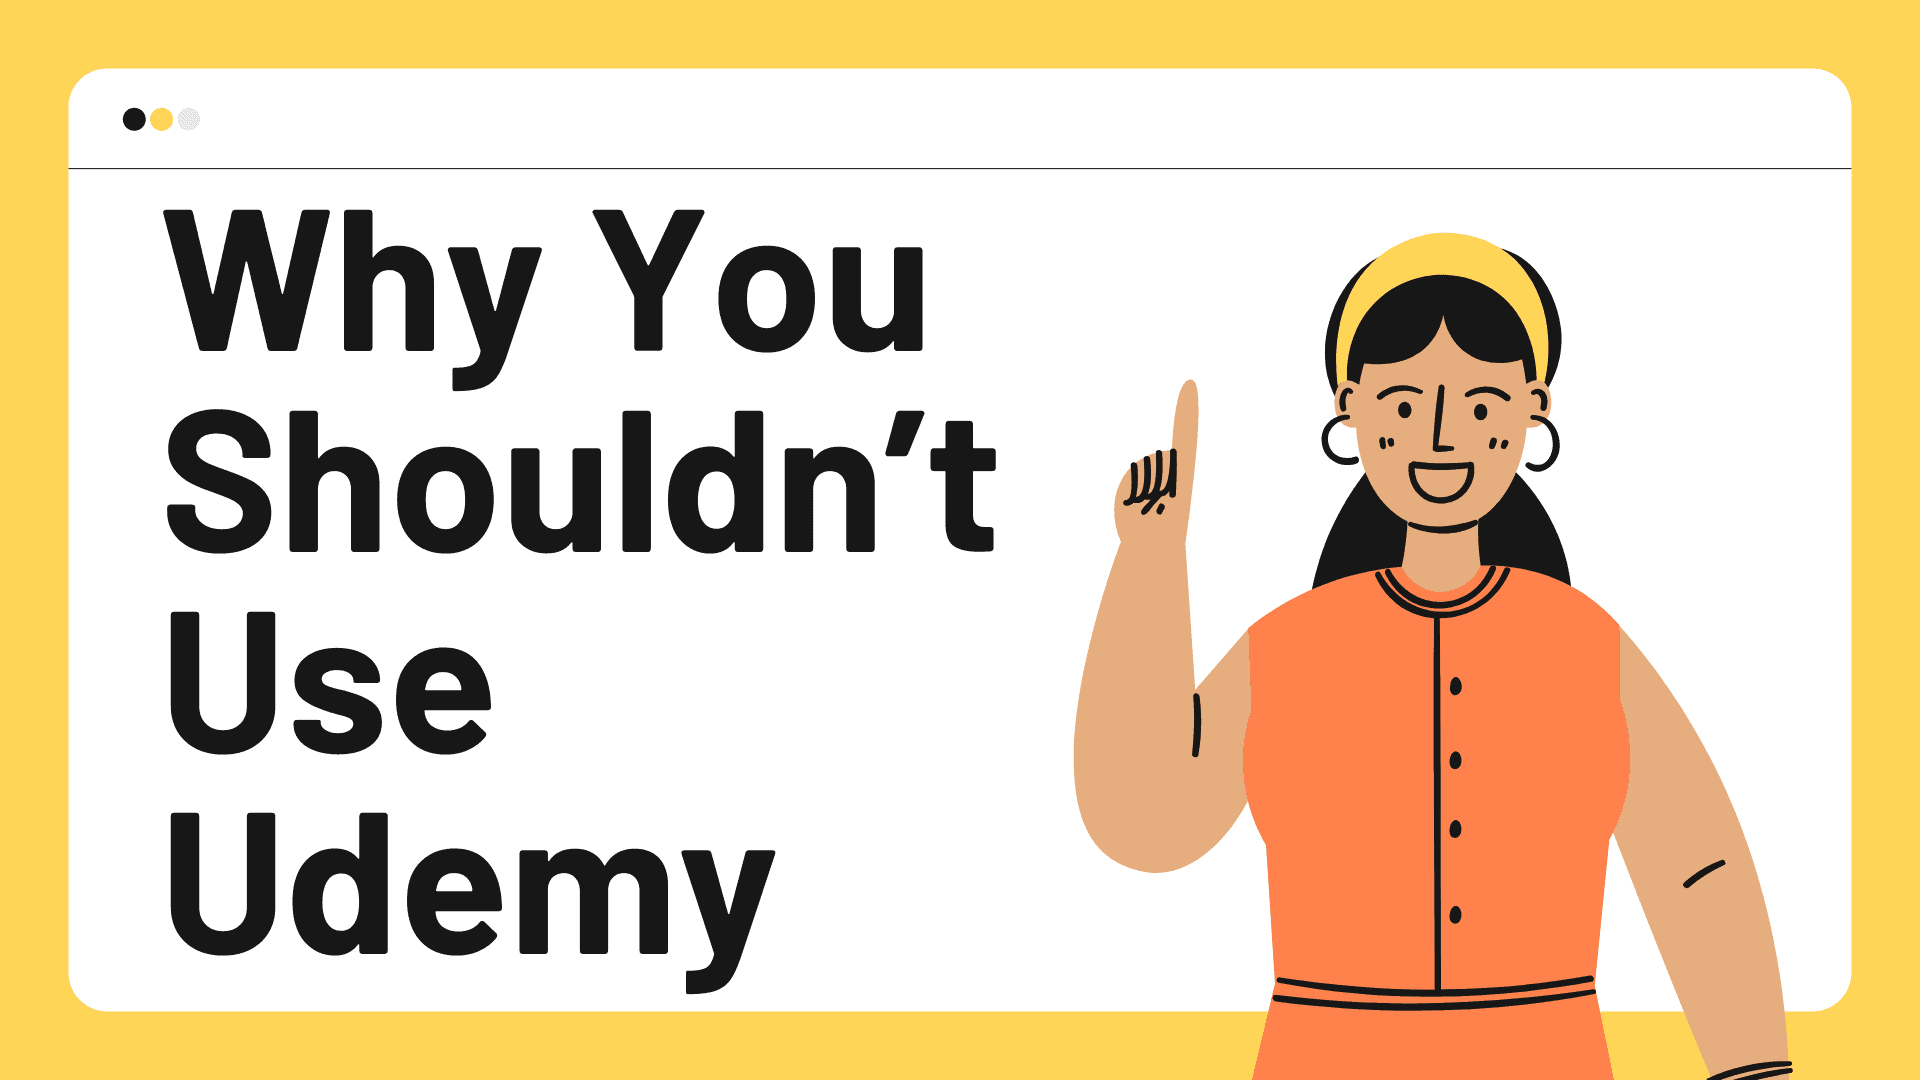 Why You Shouldn’t Use Udemy